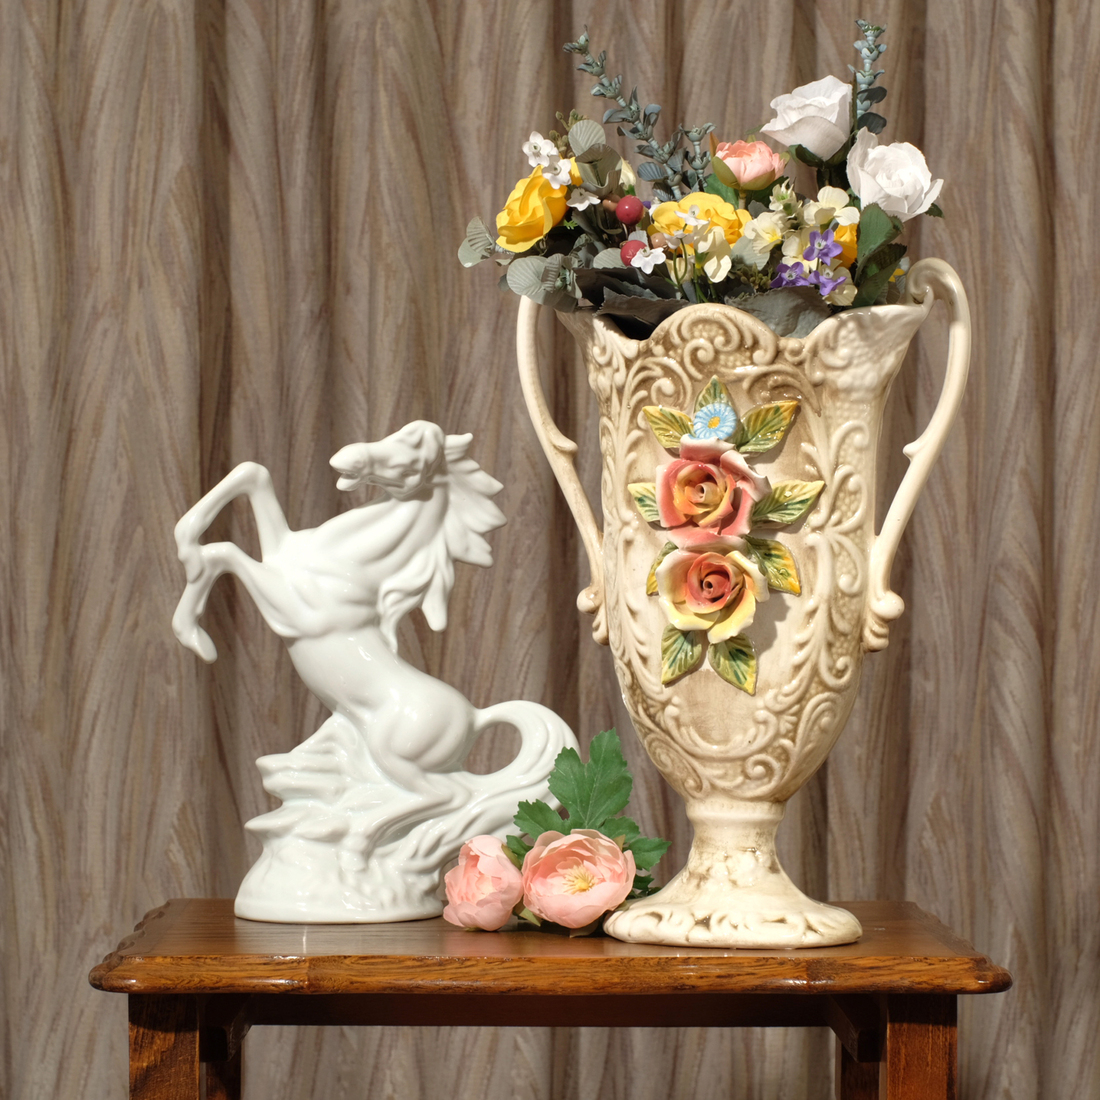 Still life with large vase, horse statue and flowers